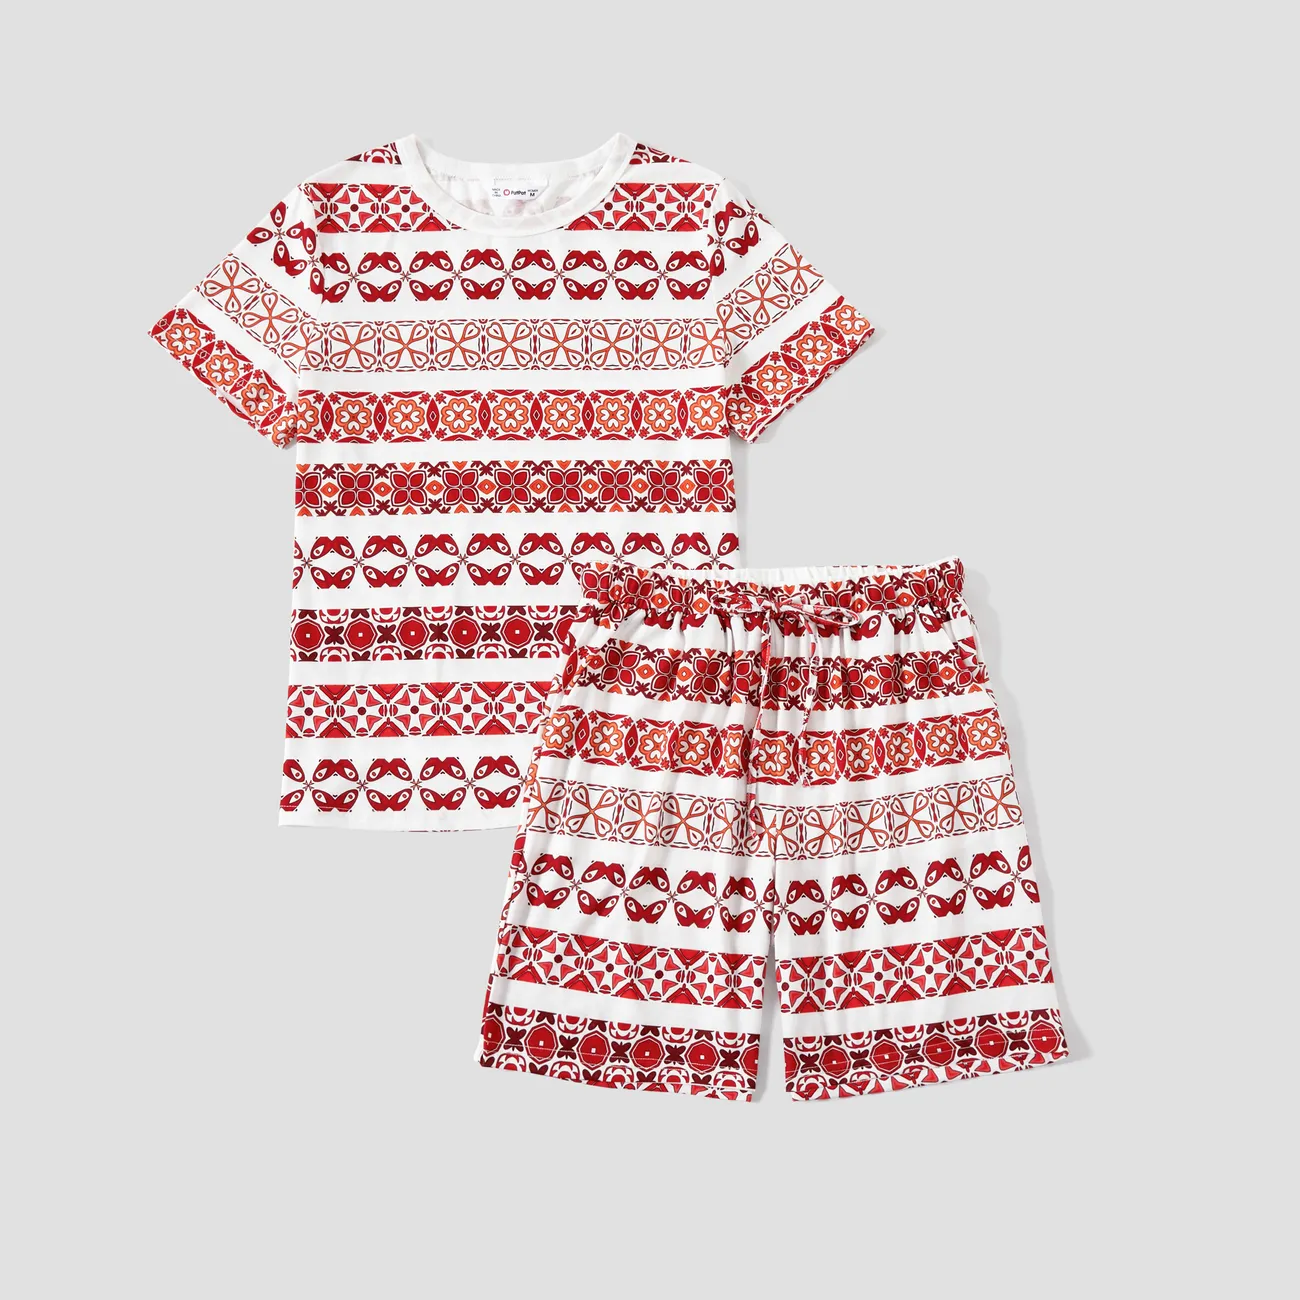 Family Matching Fair Isle Printed Short-Sleeve Top and Pocketed Shorts Pajamas Sets (Flame Resistant) Red big image 1